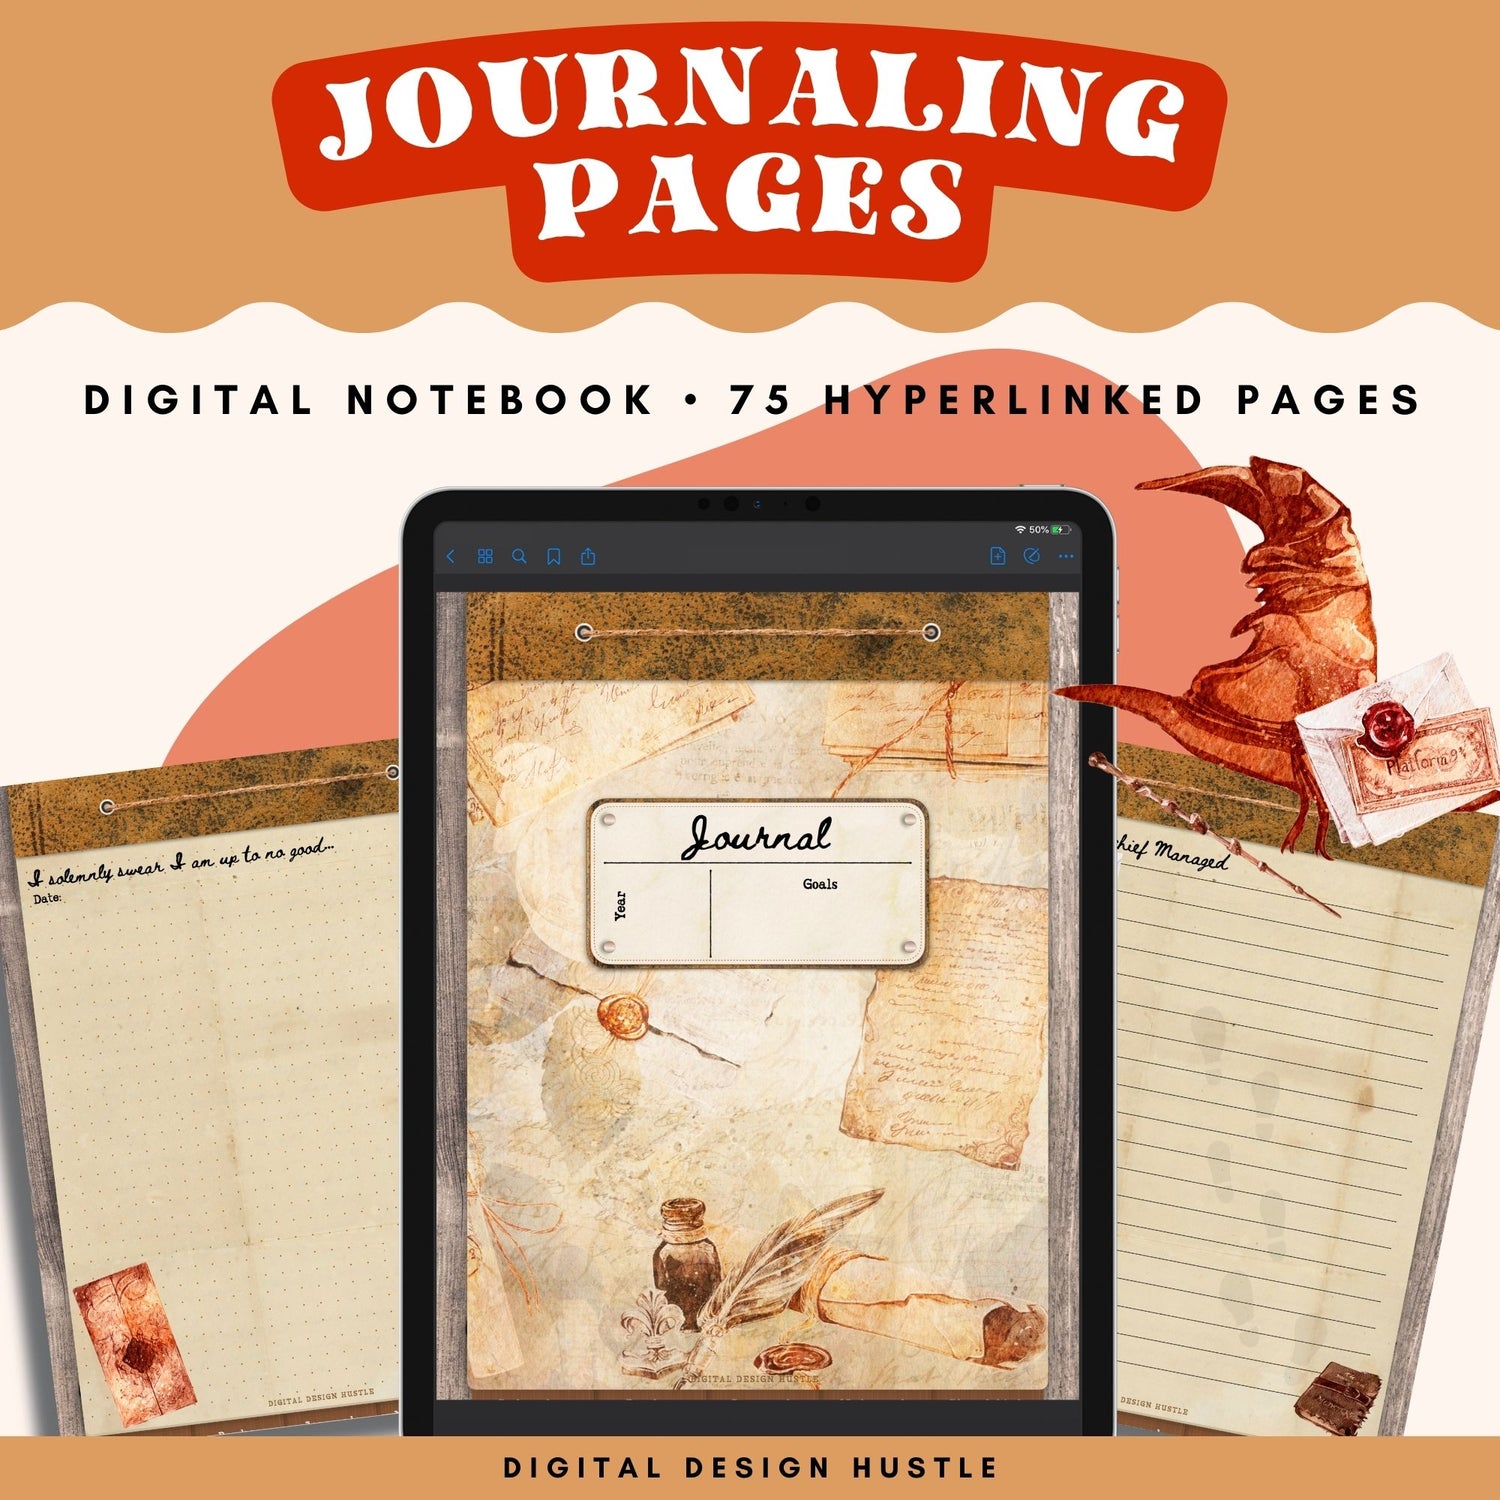 Welcome to the Sorcerers School of Wizardry! This Wizard School digital reading journal for wizards and sorcerers is a fun way to track reading progress, take notes in the digital notebook and write mythical spells and charms in the digital journal.